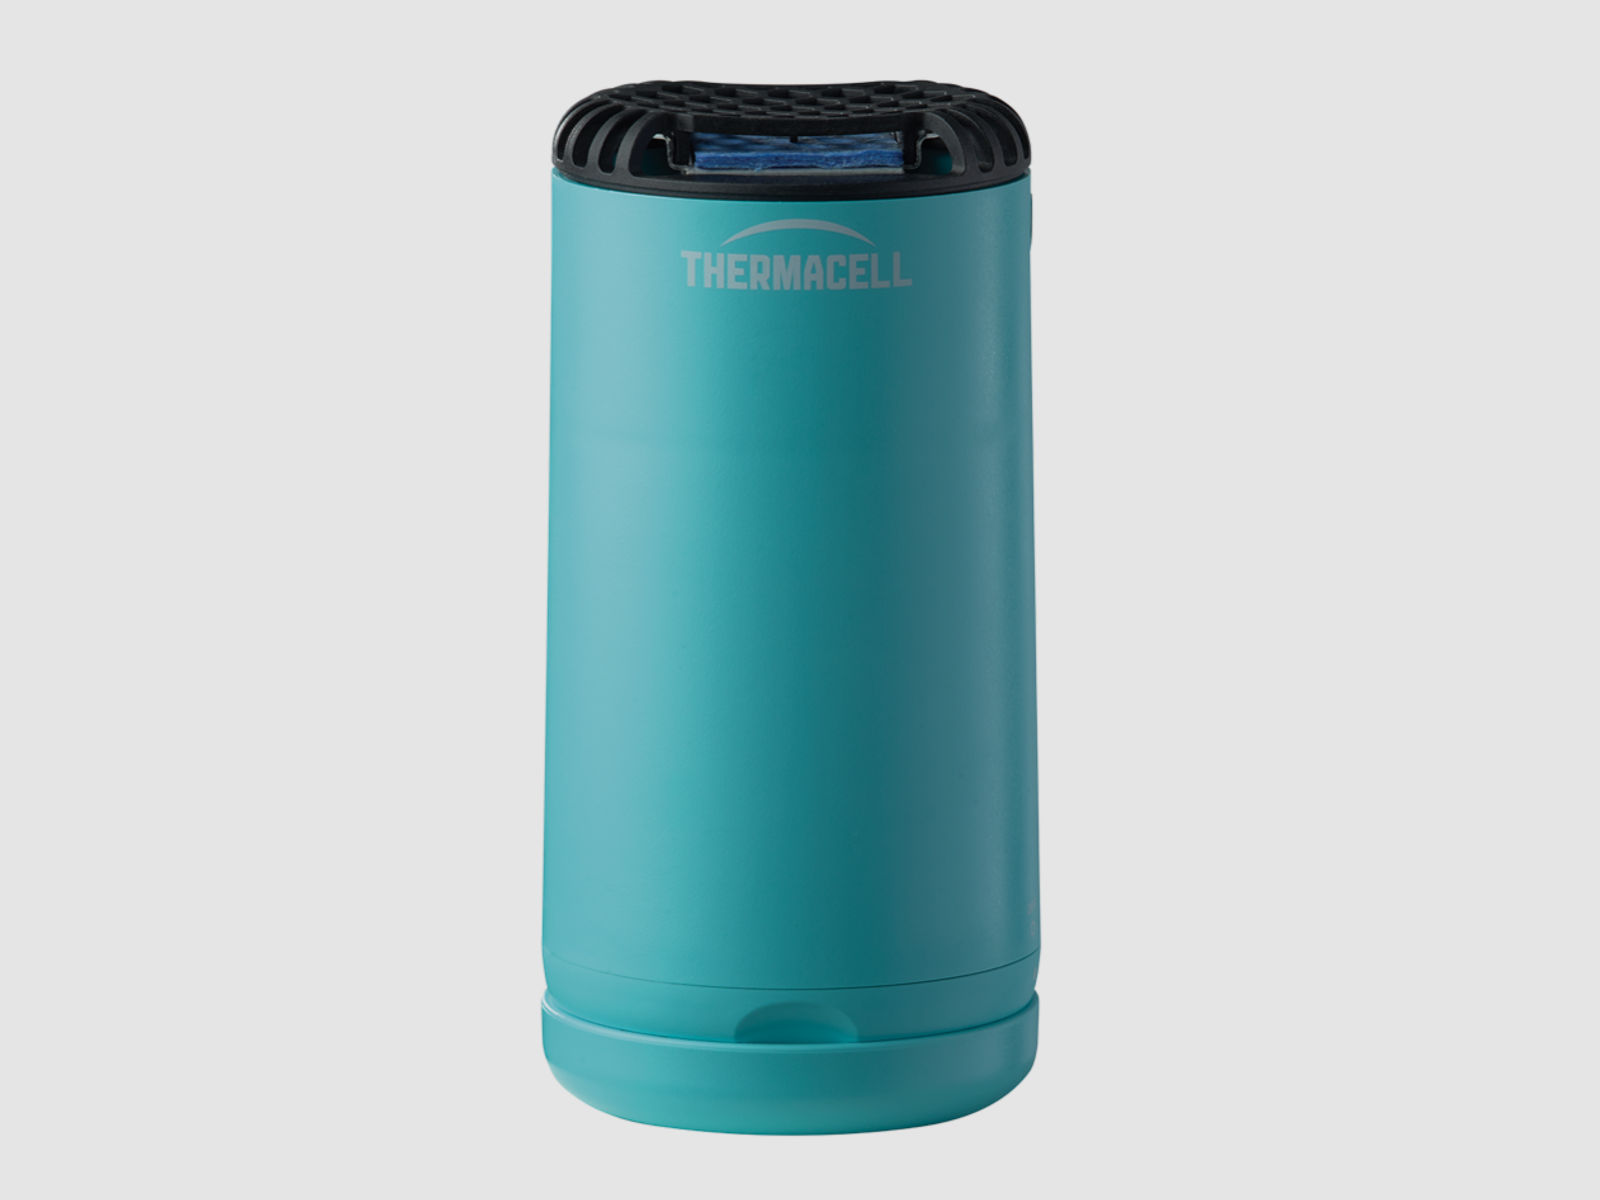 THERMACELL Mückenabwehr Protect in blau 86600495